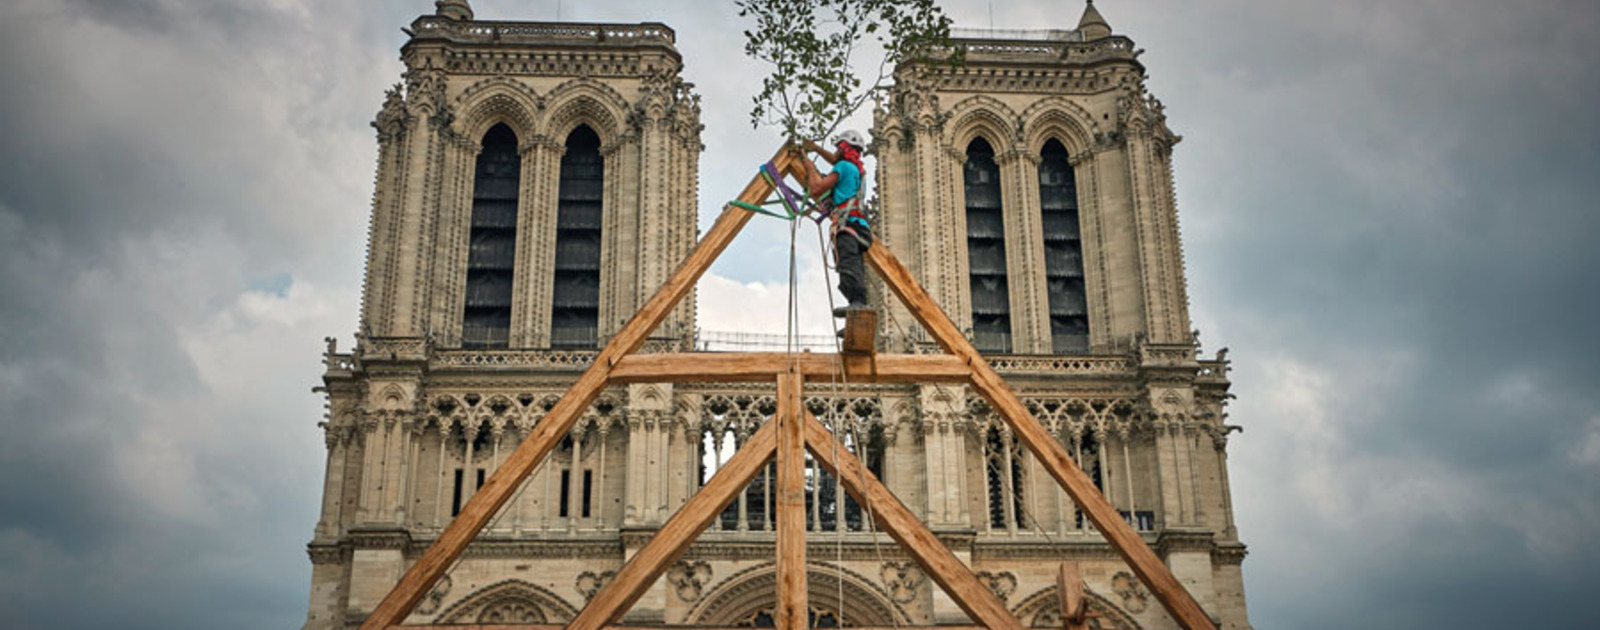 assemble rigidity Circle Our Lady of Paris and Why It Is So Important to Save Her | Stories | Notre  Dame Magazine | University of Notre Dame